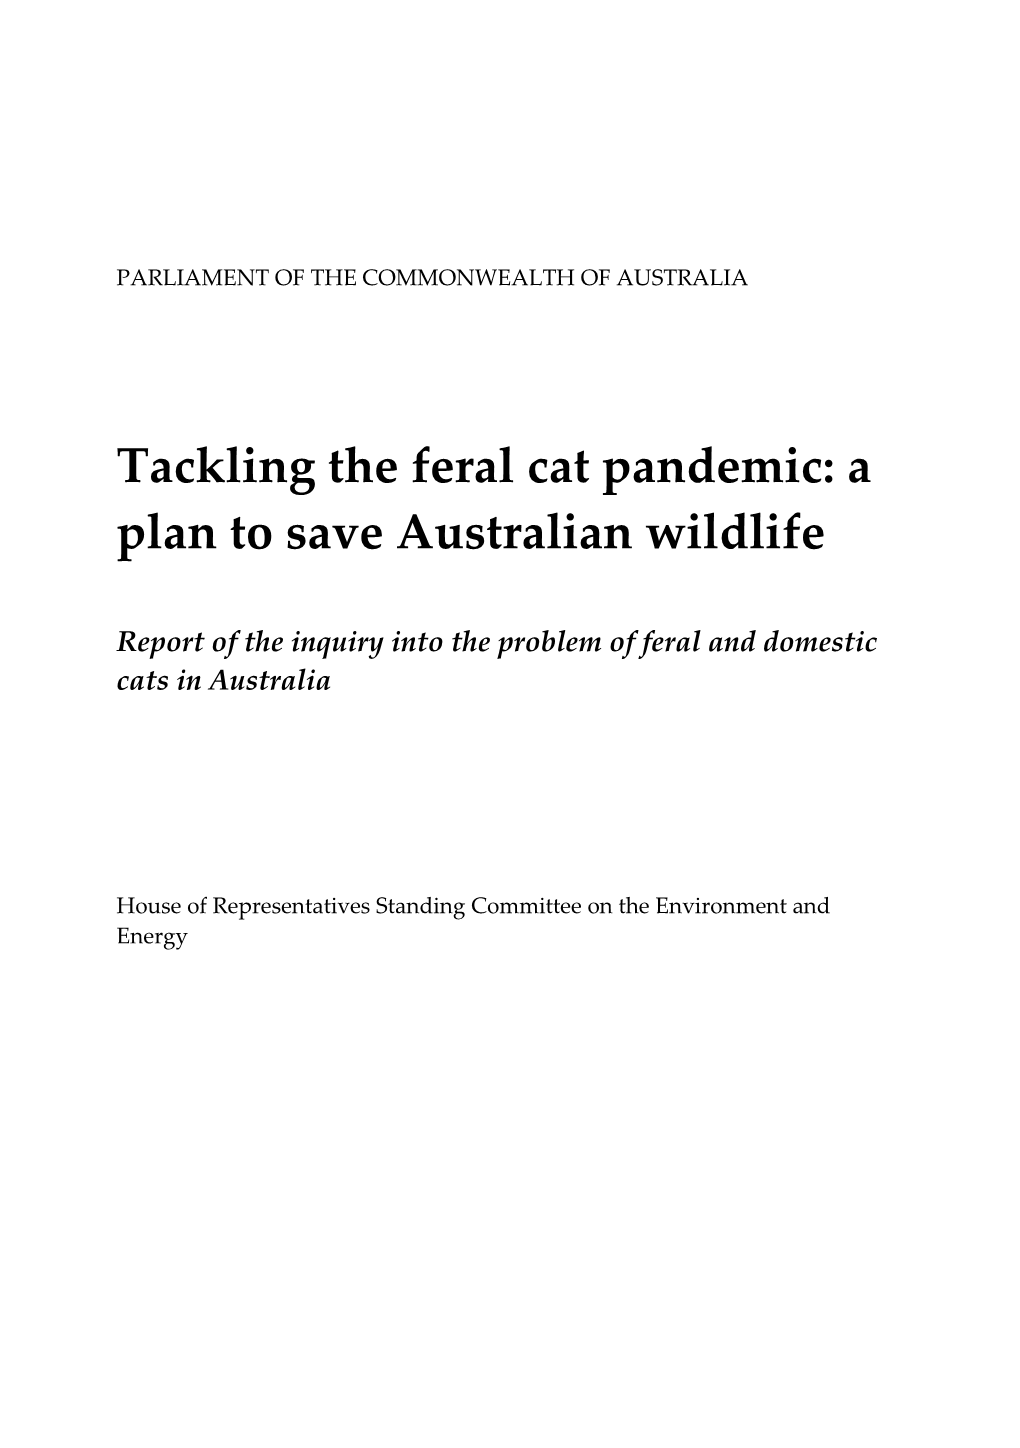 Tackling the Feral Cat Pandemic: a Plan to Save Australian Wildlife